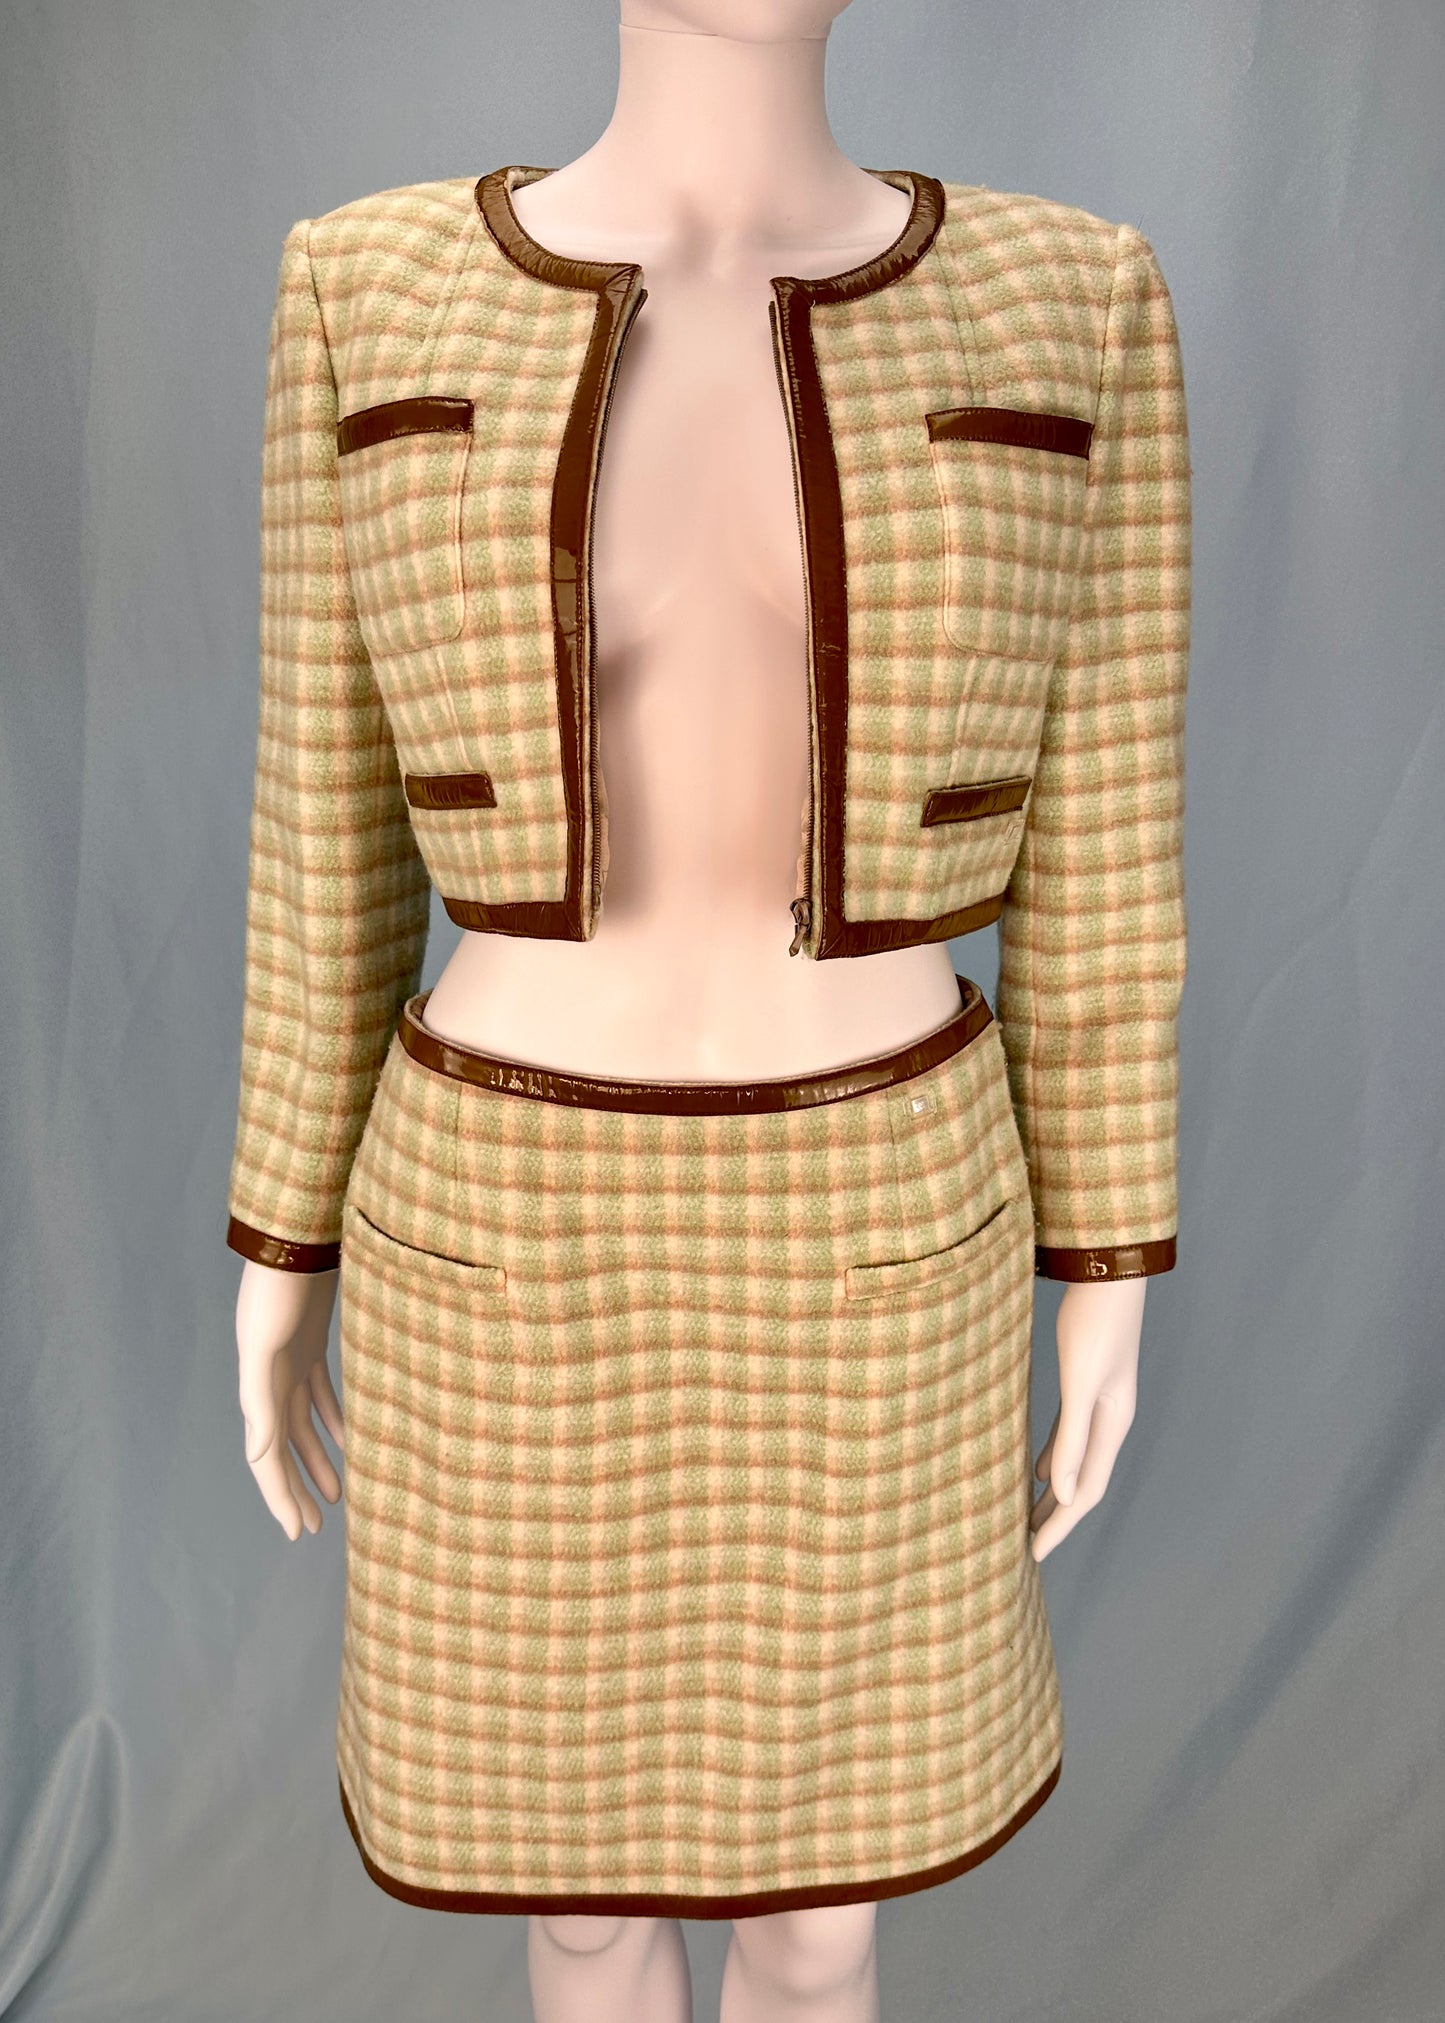 Chanel Fall 2001 Runway Pastel Checked Skirt & Jacket Suit Set